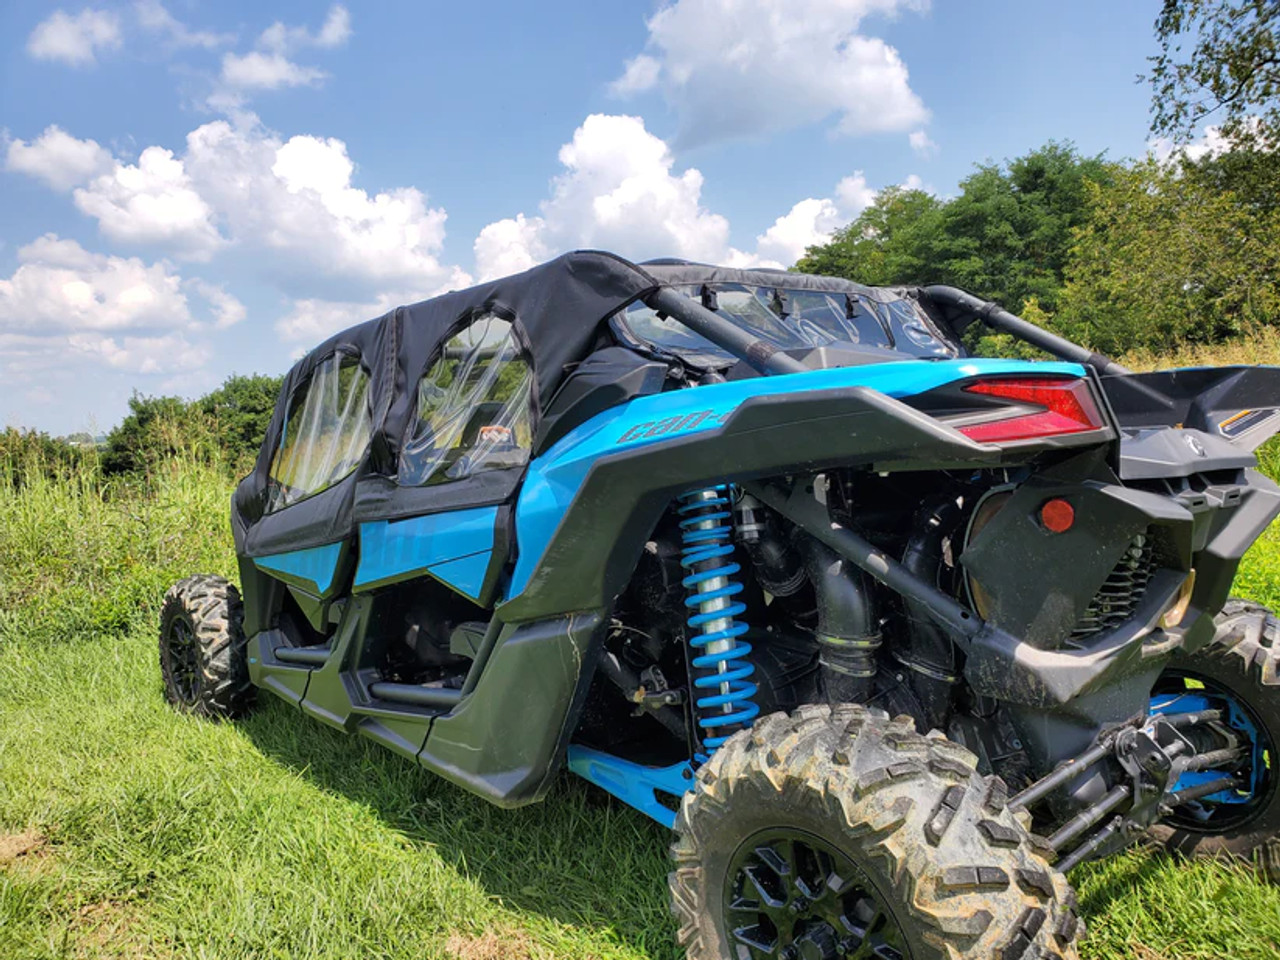 3 Star side x side Can-Am Maverick X3 Max upper doors and rear window side and rear angle view